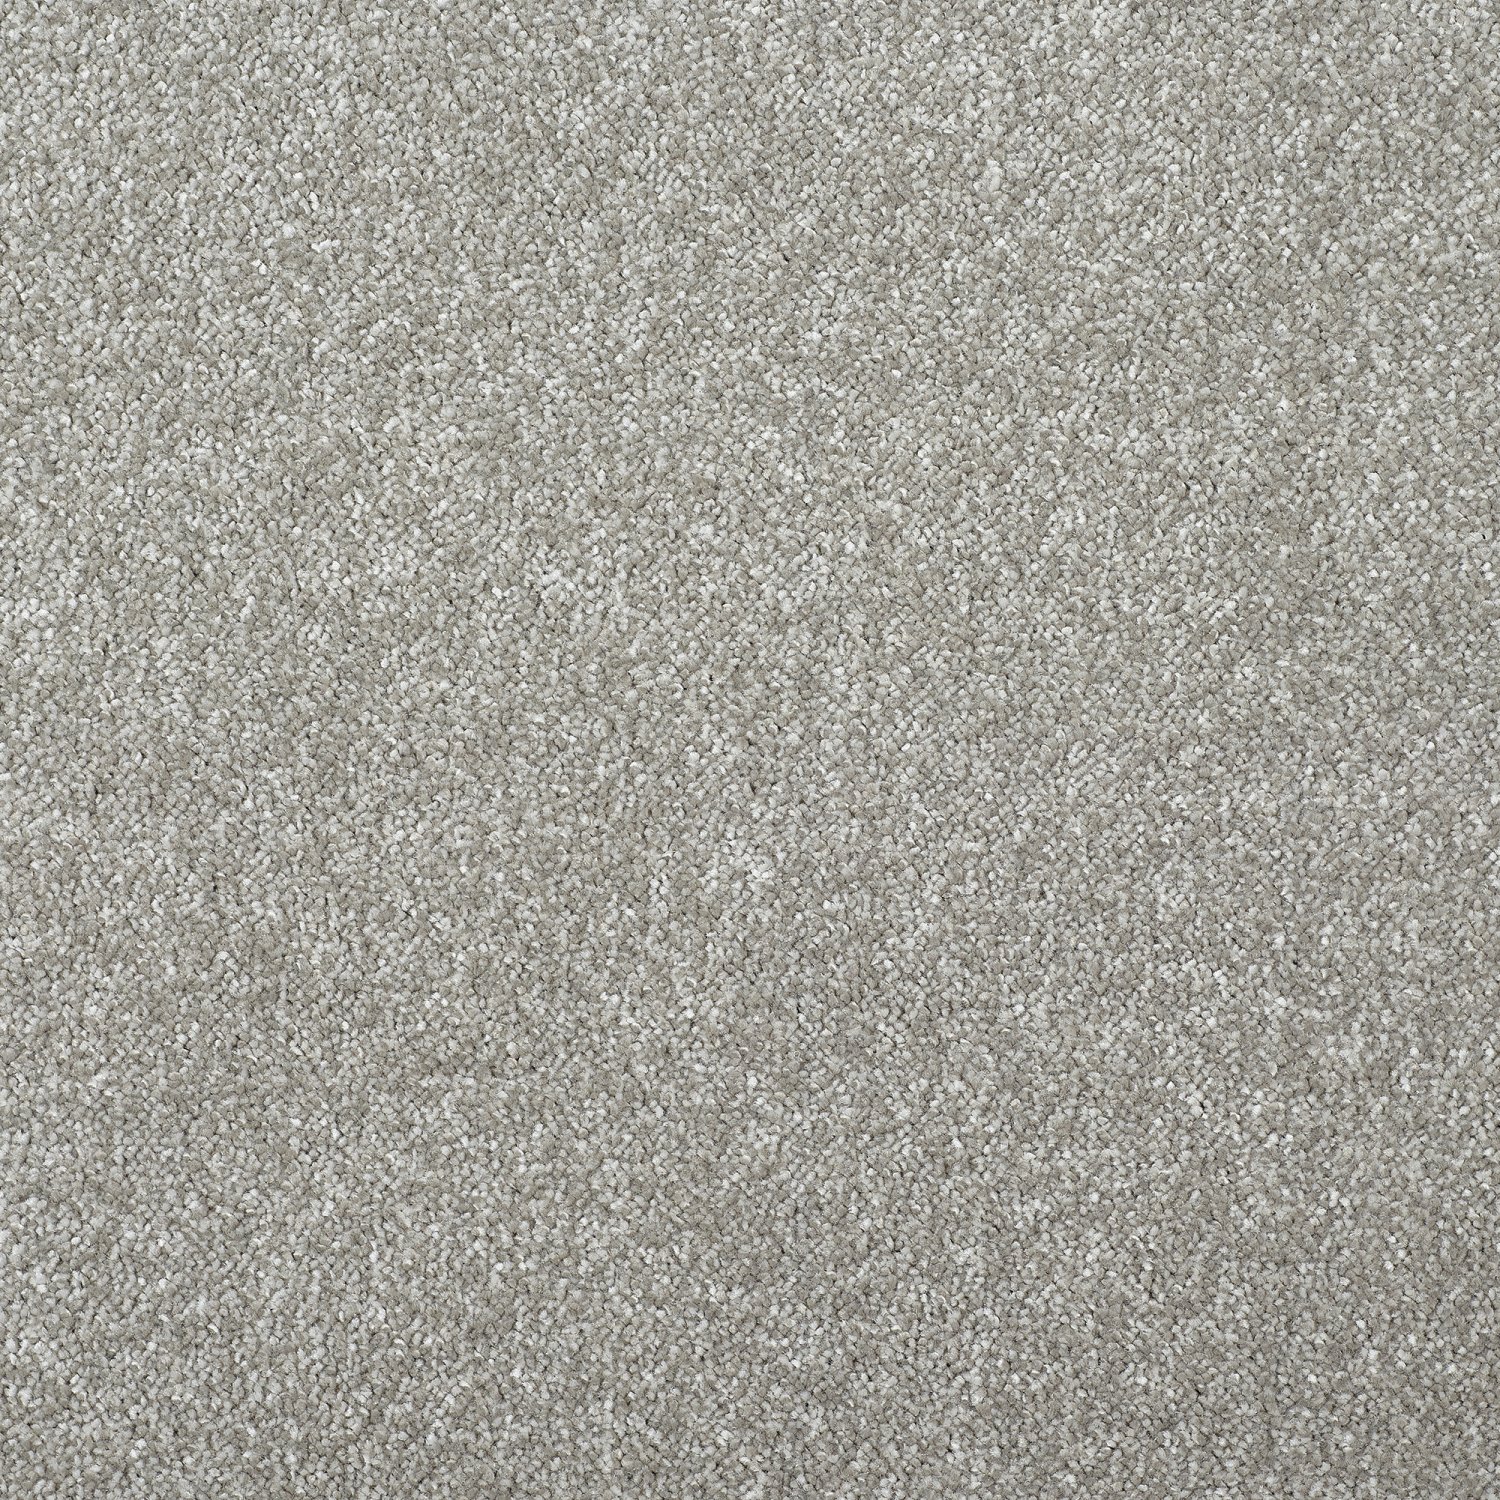 Stainfree Timeless Twist Carpet - 27 Oyster